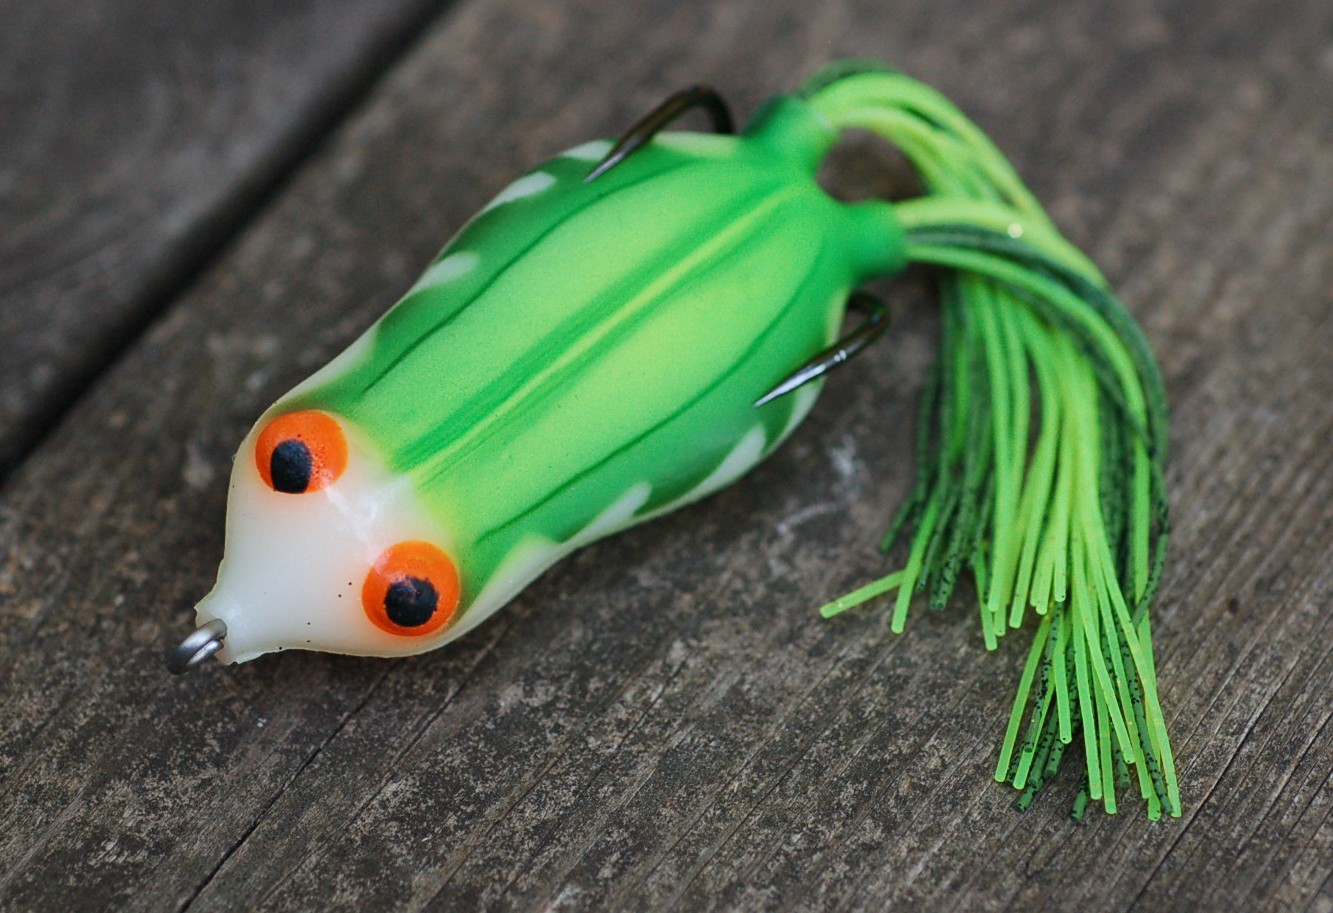 Bass Junkies Frog Pond: Snag Proof: Ish Phat Frog Review